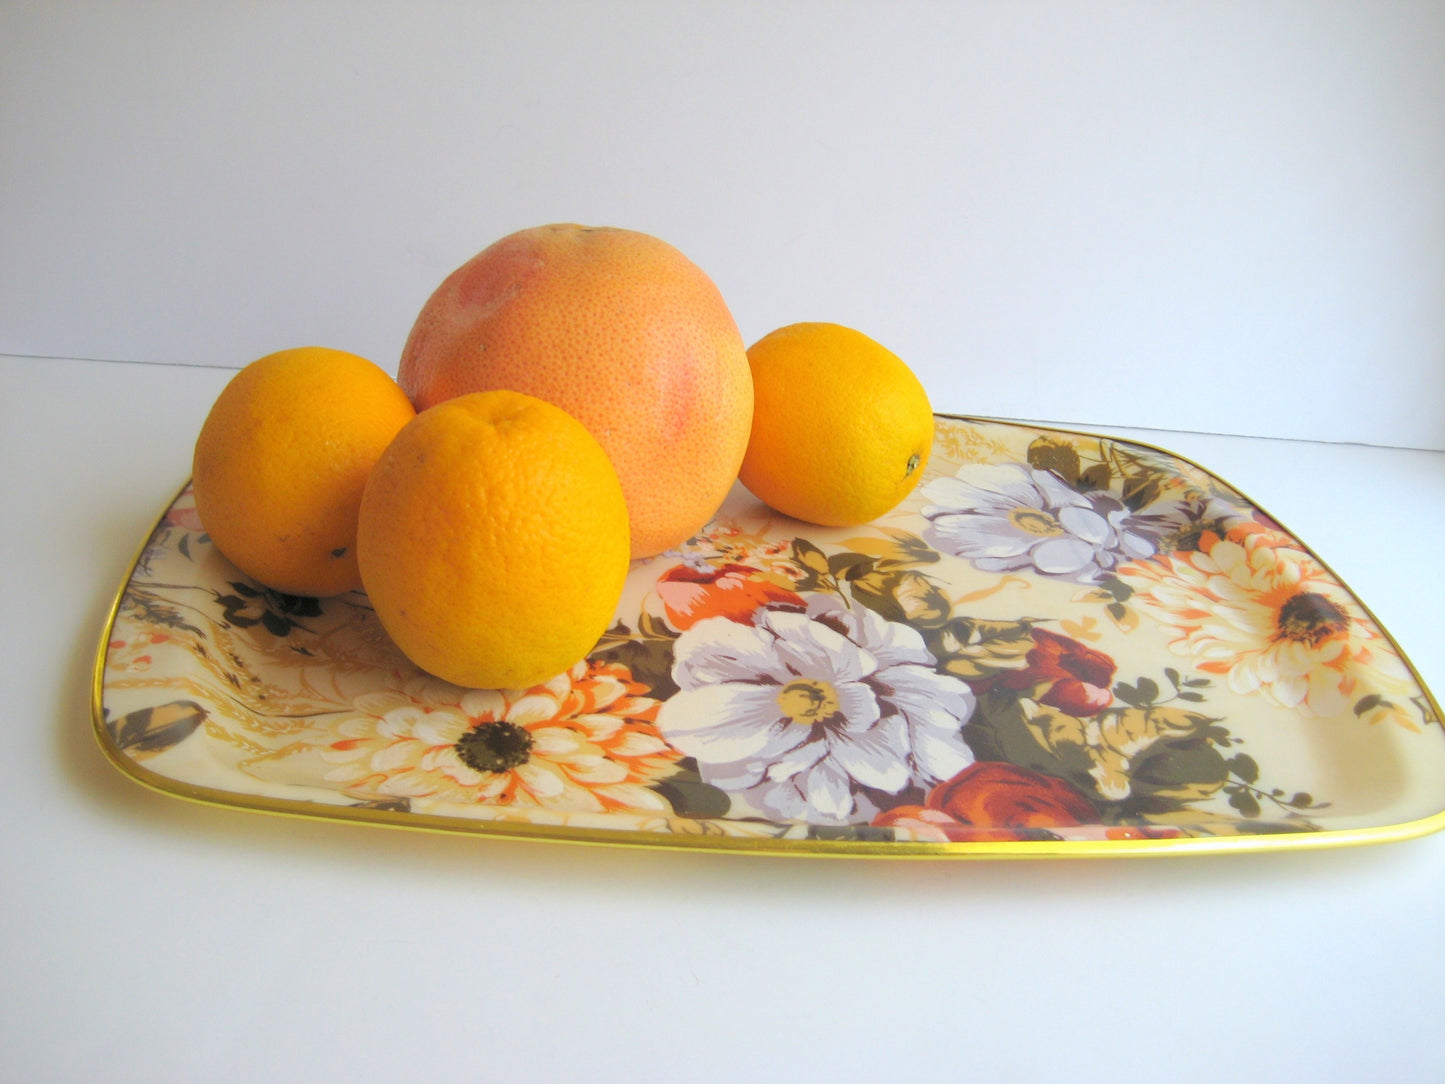 Floral Fiberglass Tray in autumn colors